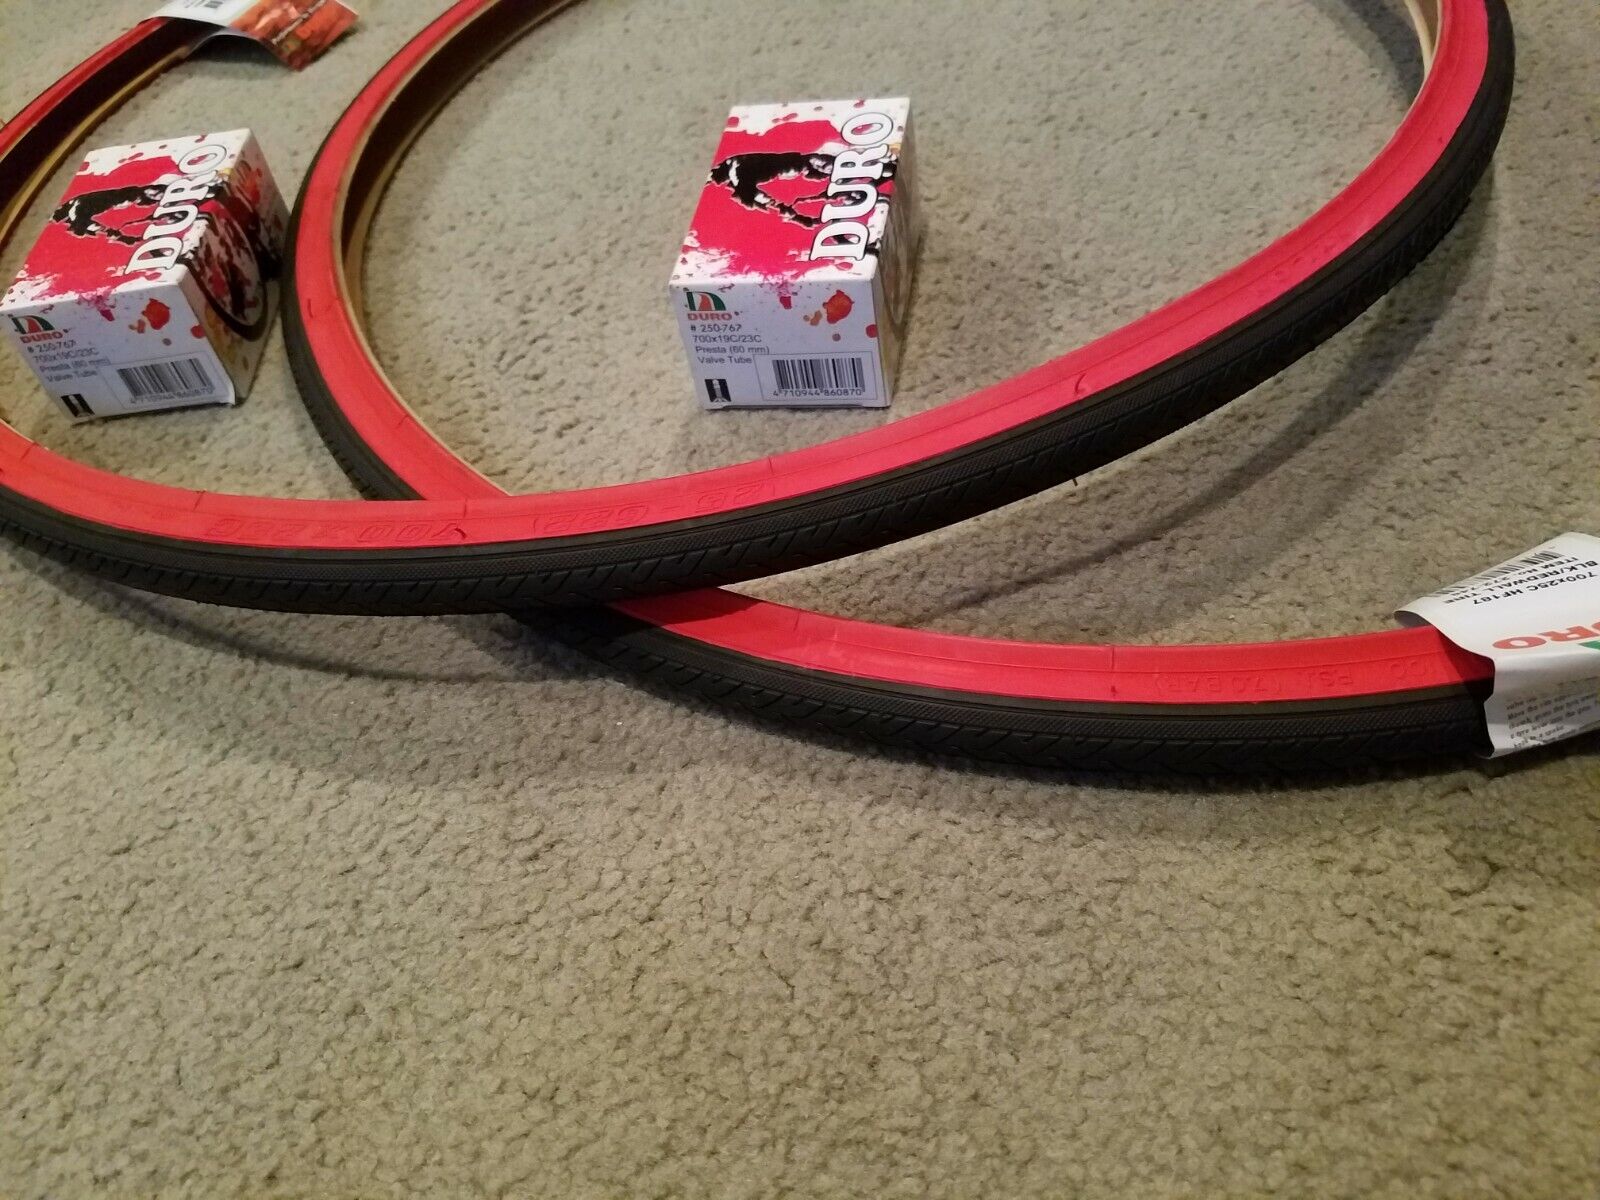 TWO(2) DURO 700X25 C BICYCLE TIRES FIXIE TRACK URBAN BLACK N REDWALL & 2 TUBES 